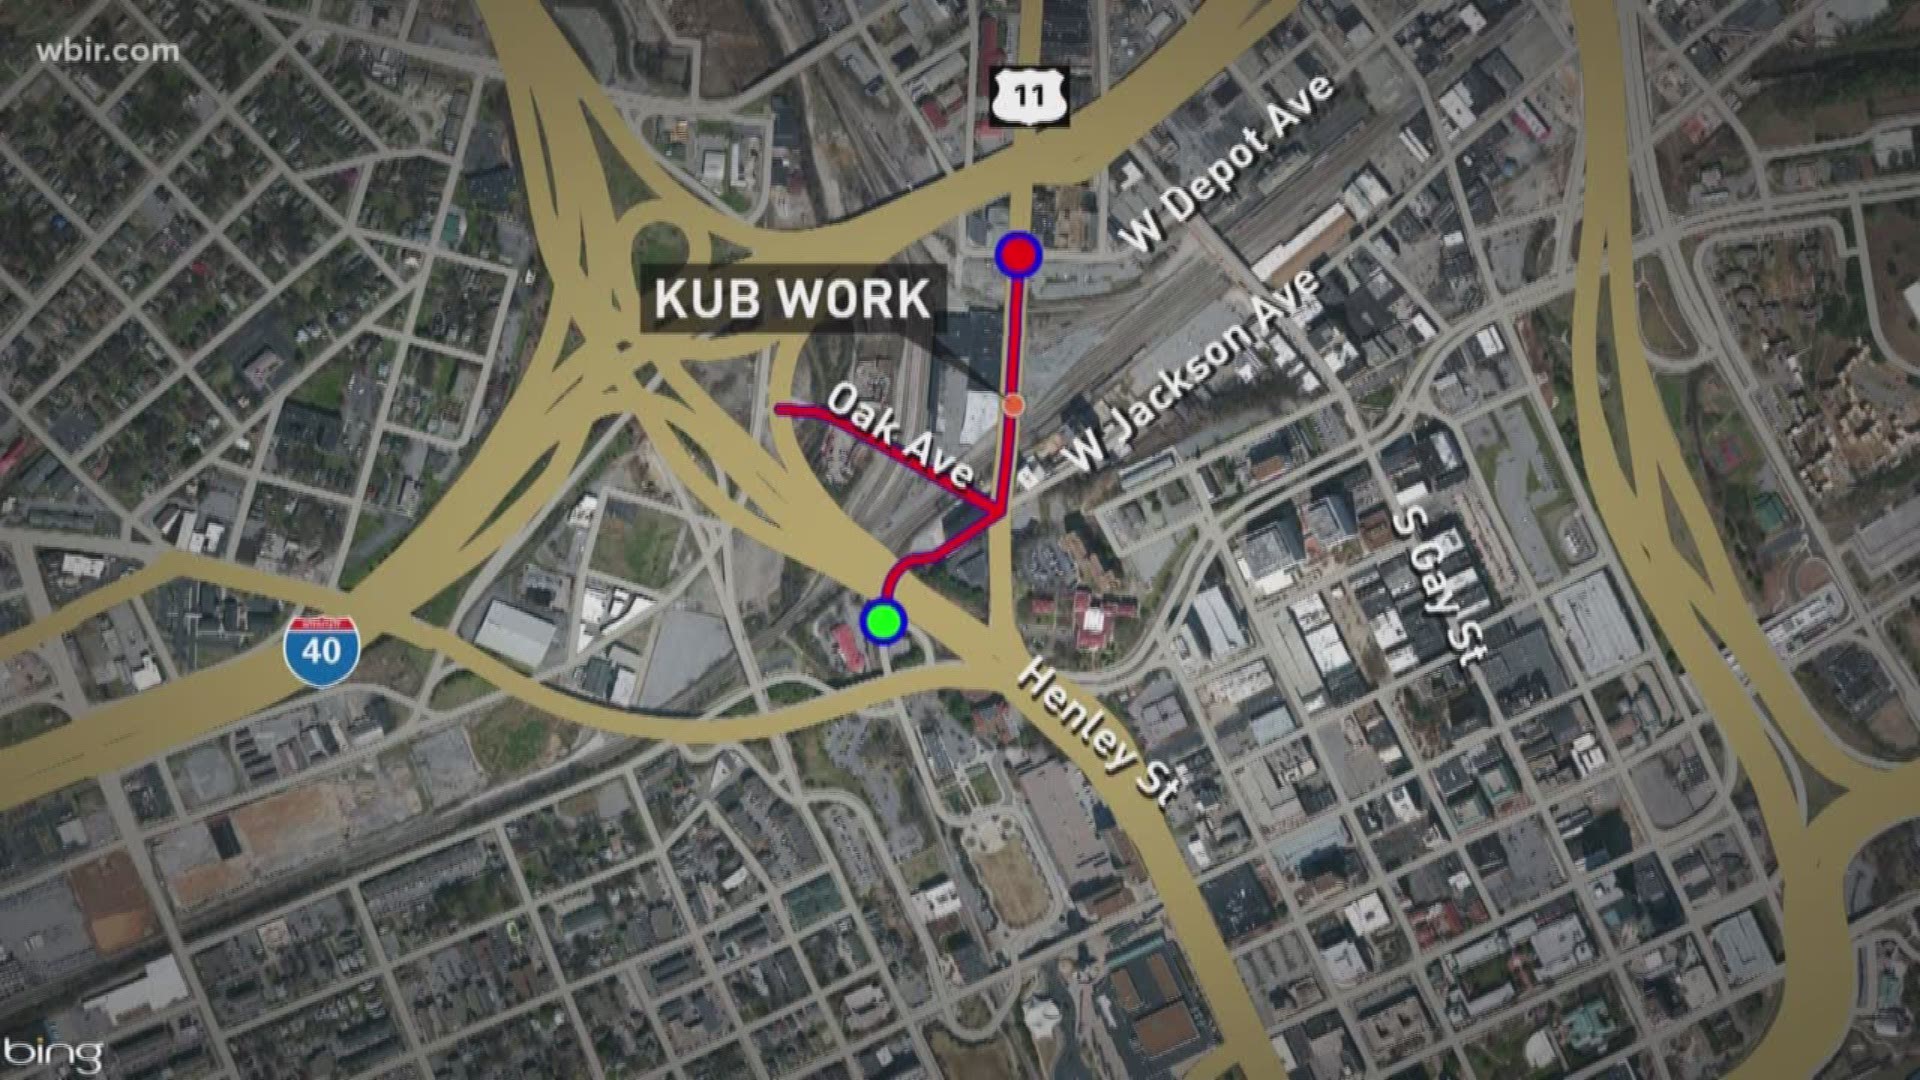 March 14, 2018: Upcoming electrical work will close a portion of downtown Knoxville in the area of Broadway and Jackson Avenue.